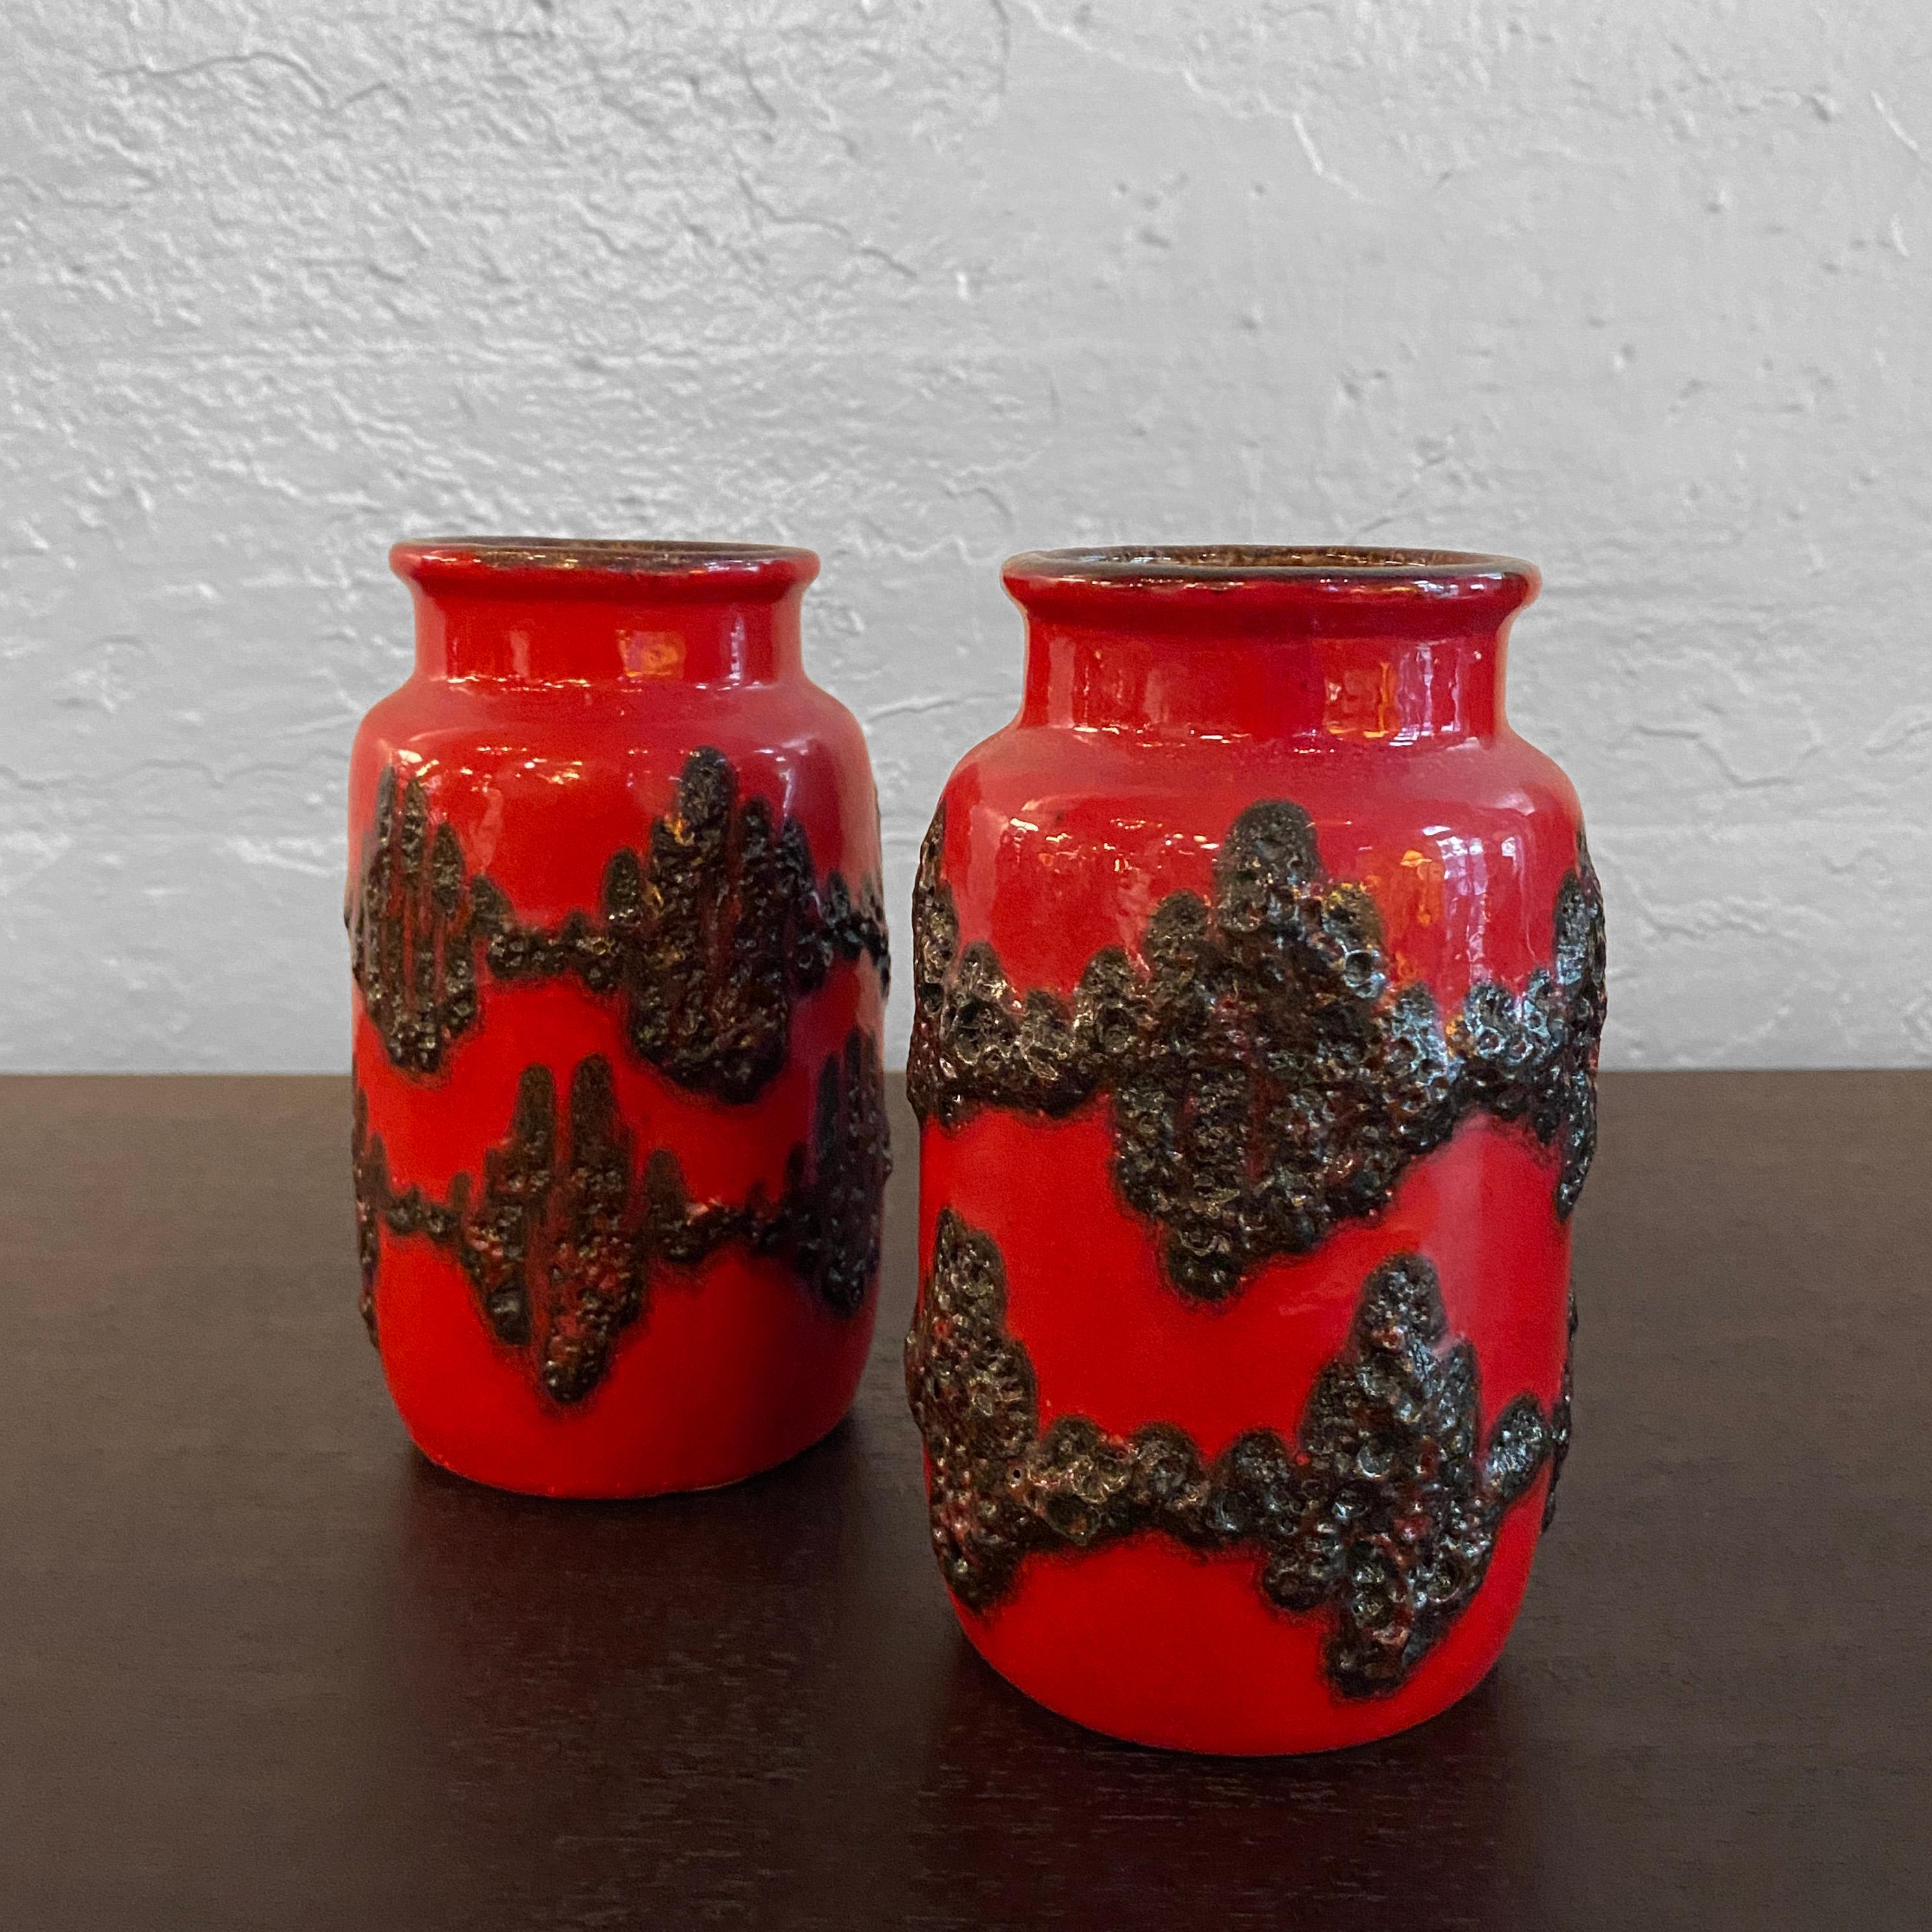 Pair of small, West German, fat lava vases by Scheurich Keramik feature striking, red and black brutalist glazes with black interiors. Their openings measure 2.5 inches diameter.